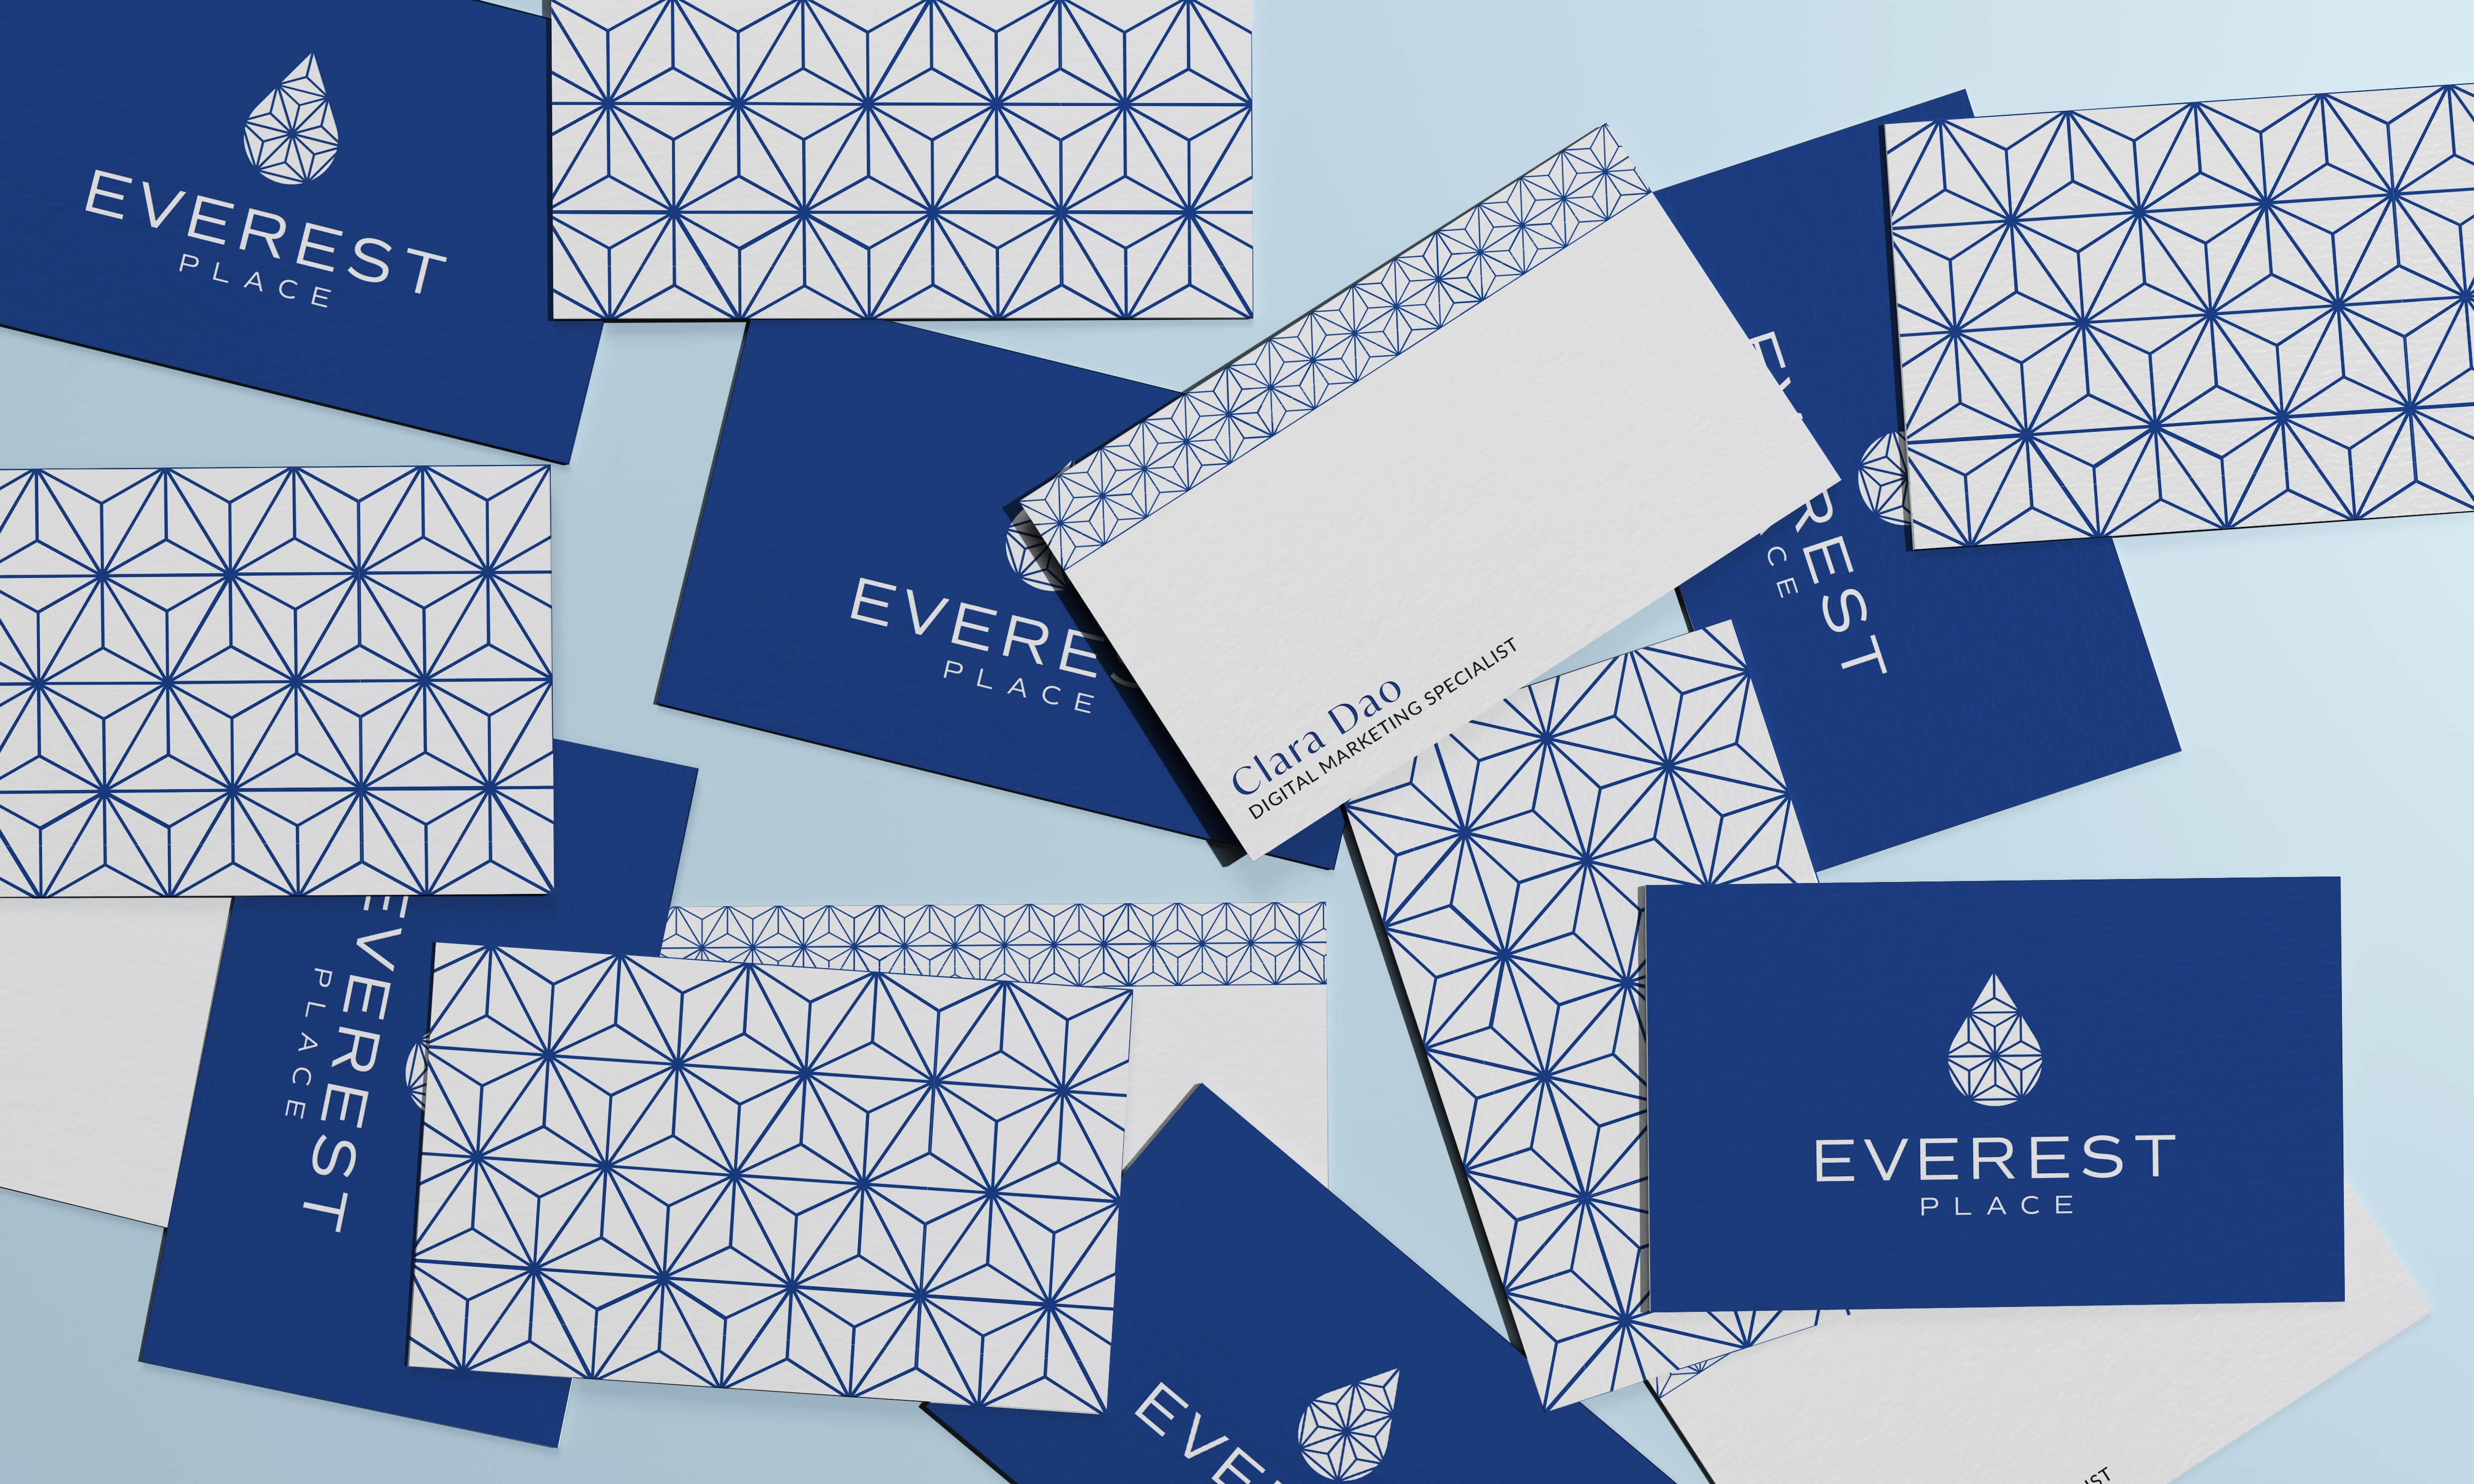 Blue and white business cards scattered on a table with the Everest Place logo.